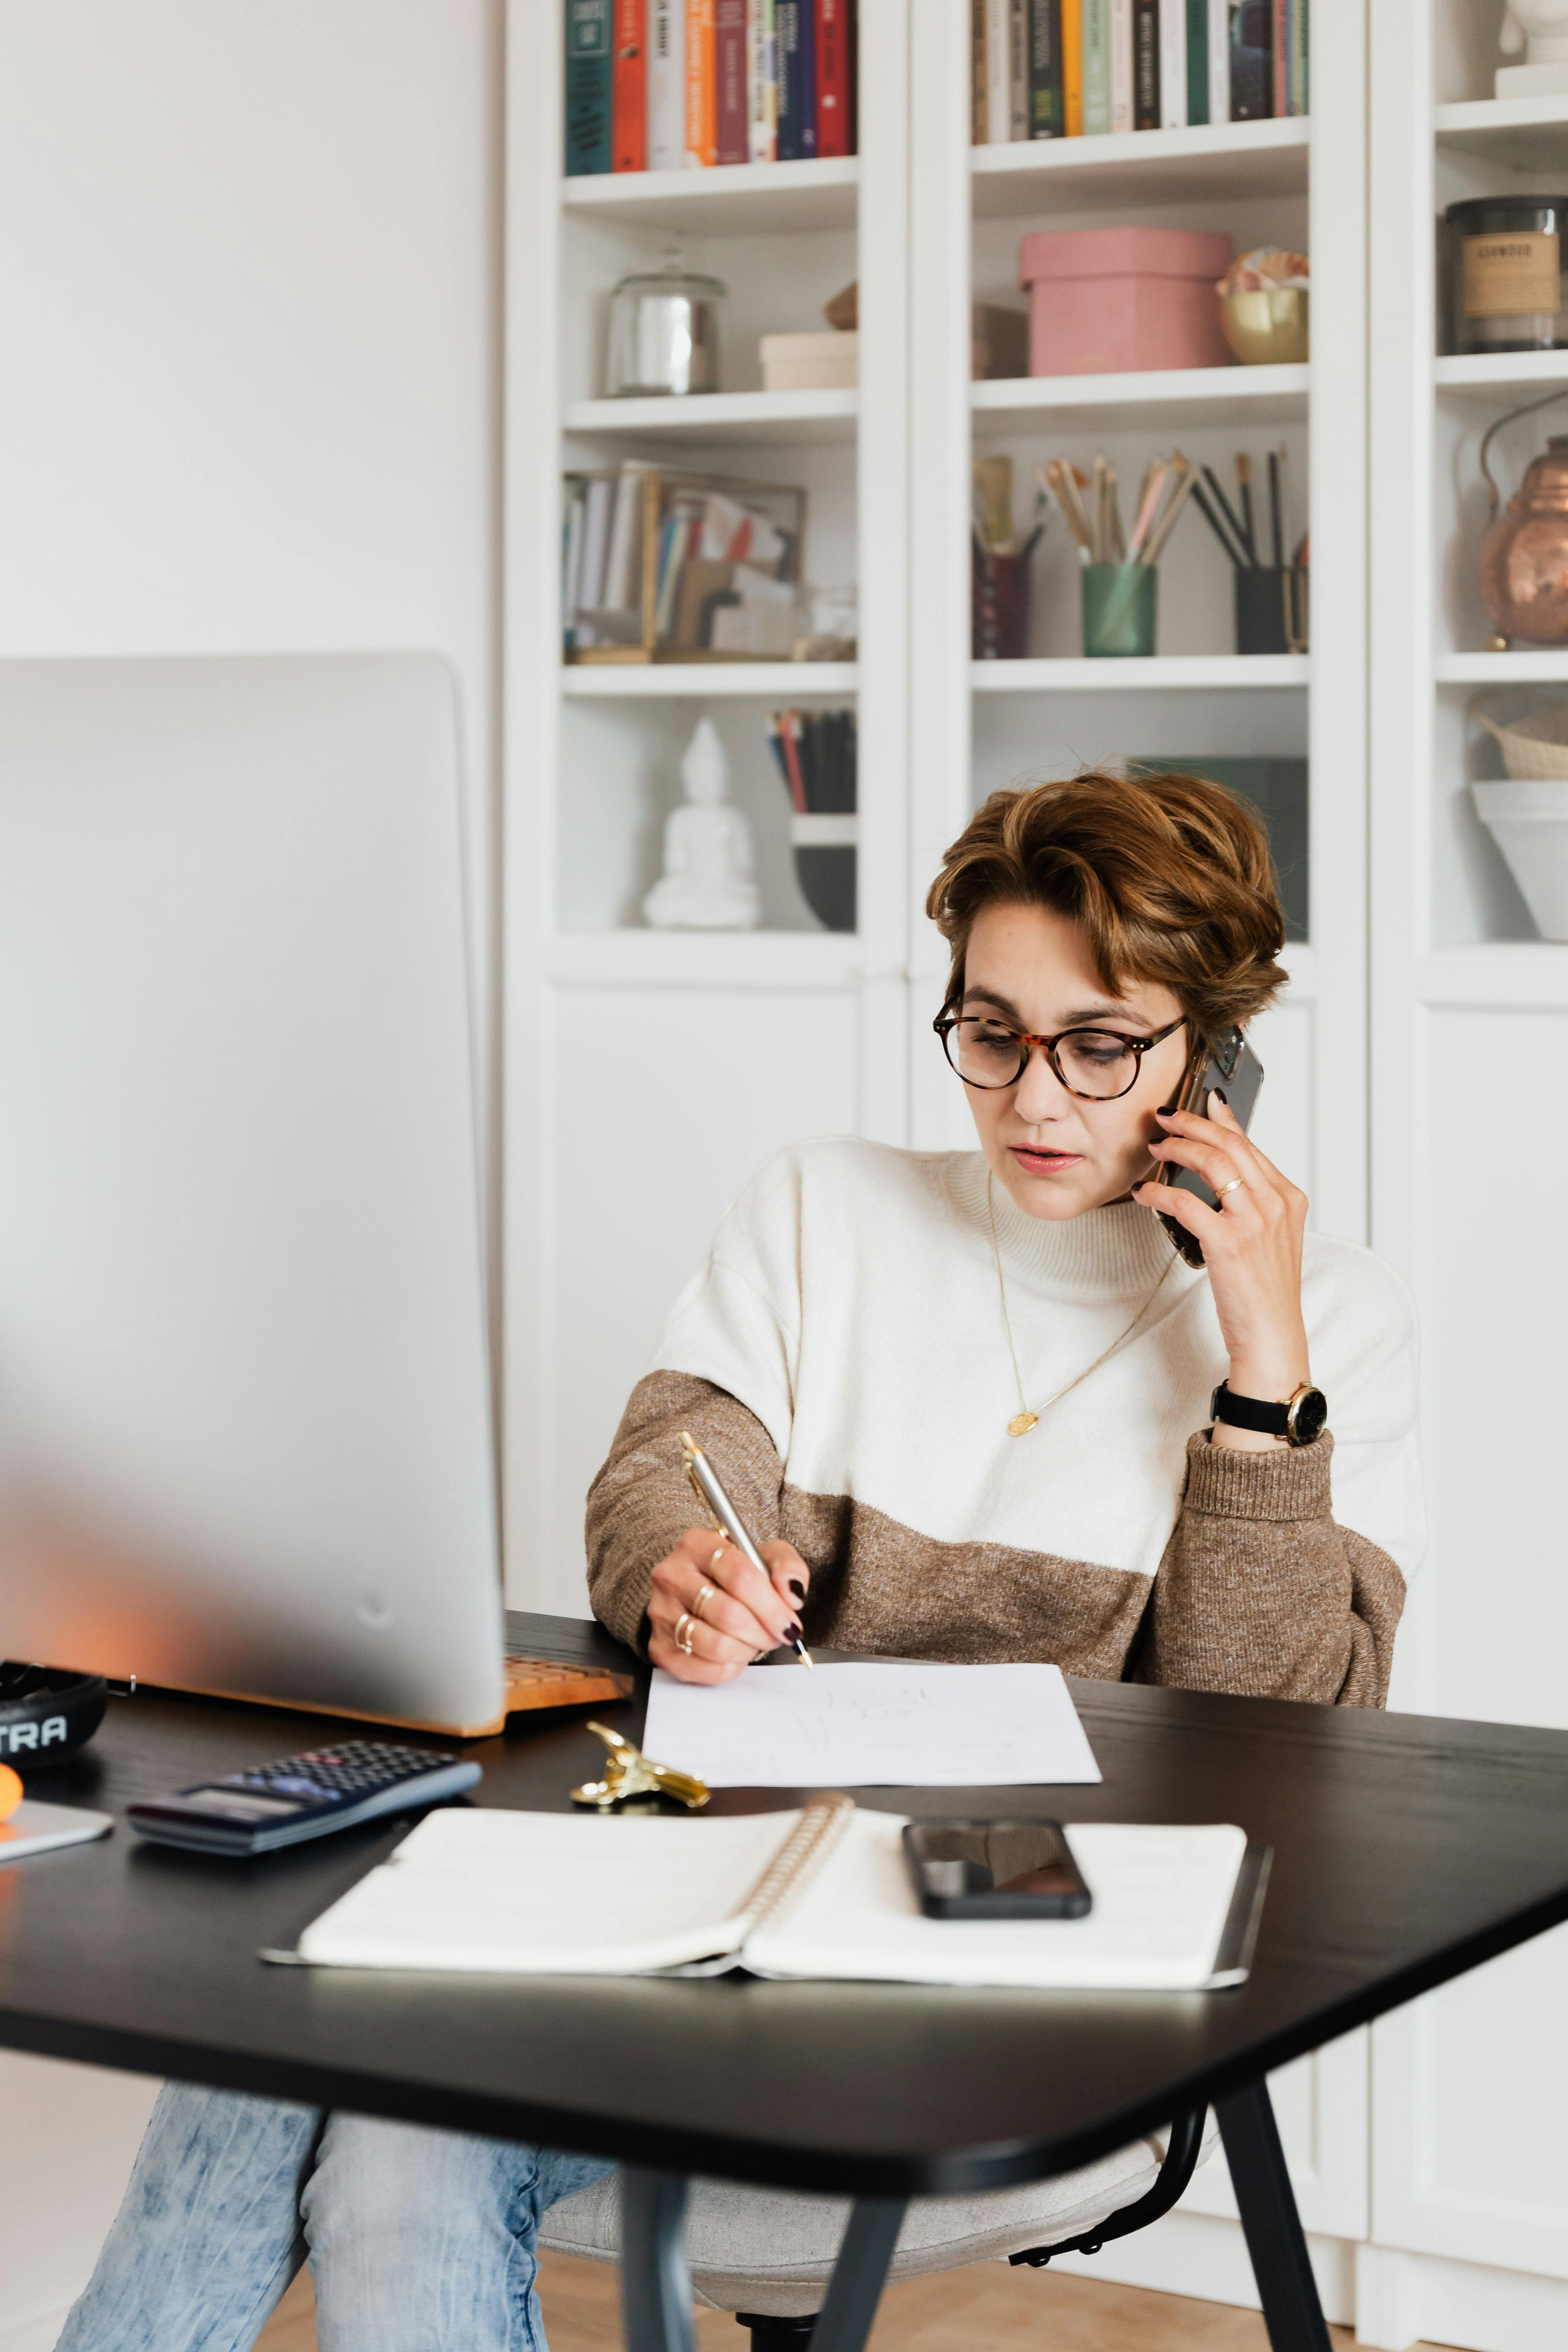 A woman on the phone while writing | Source: Pexels